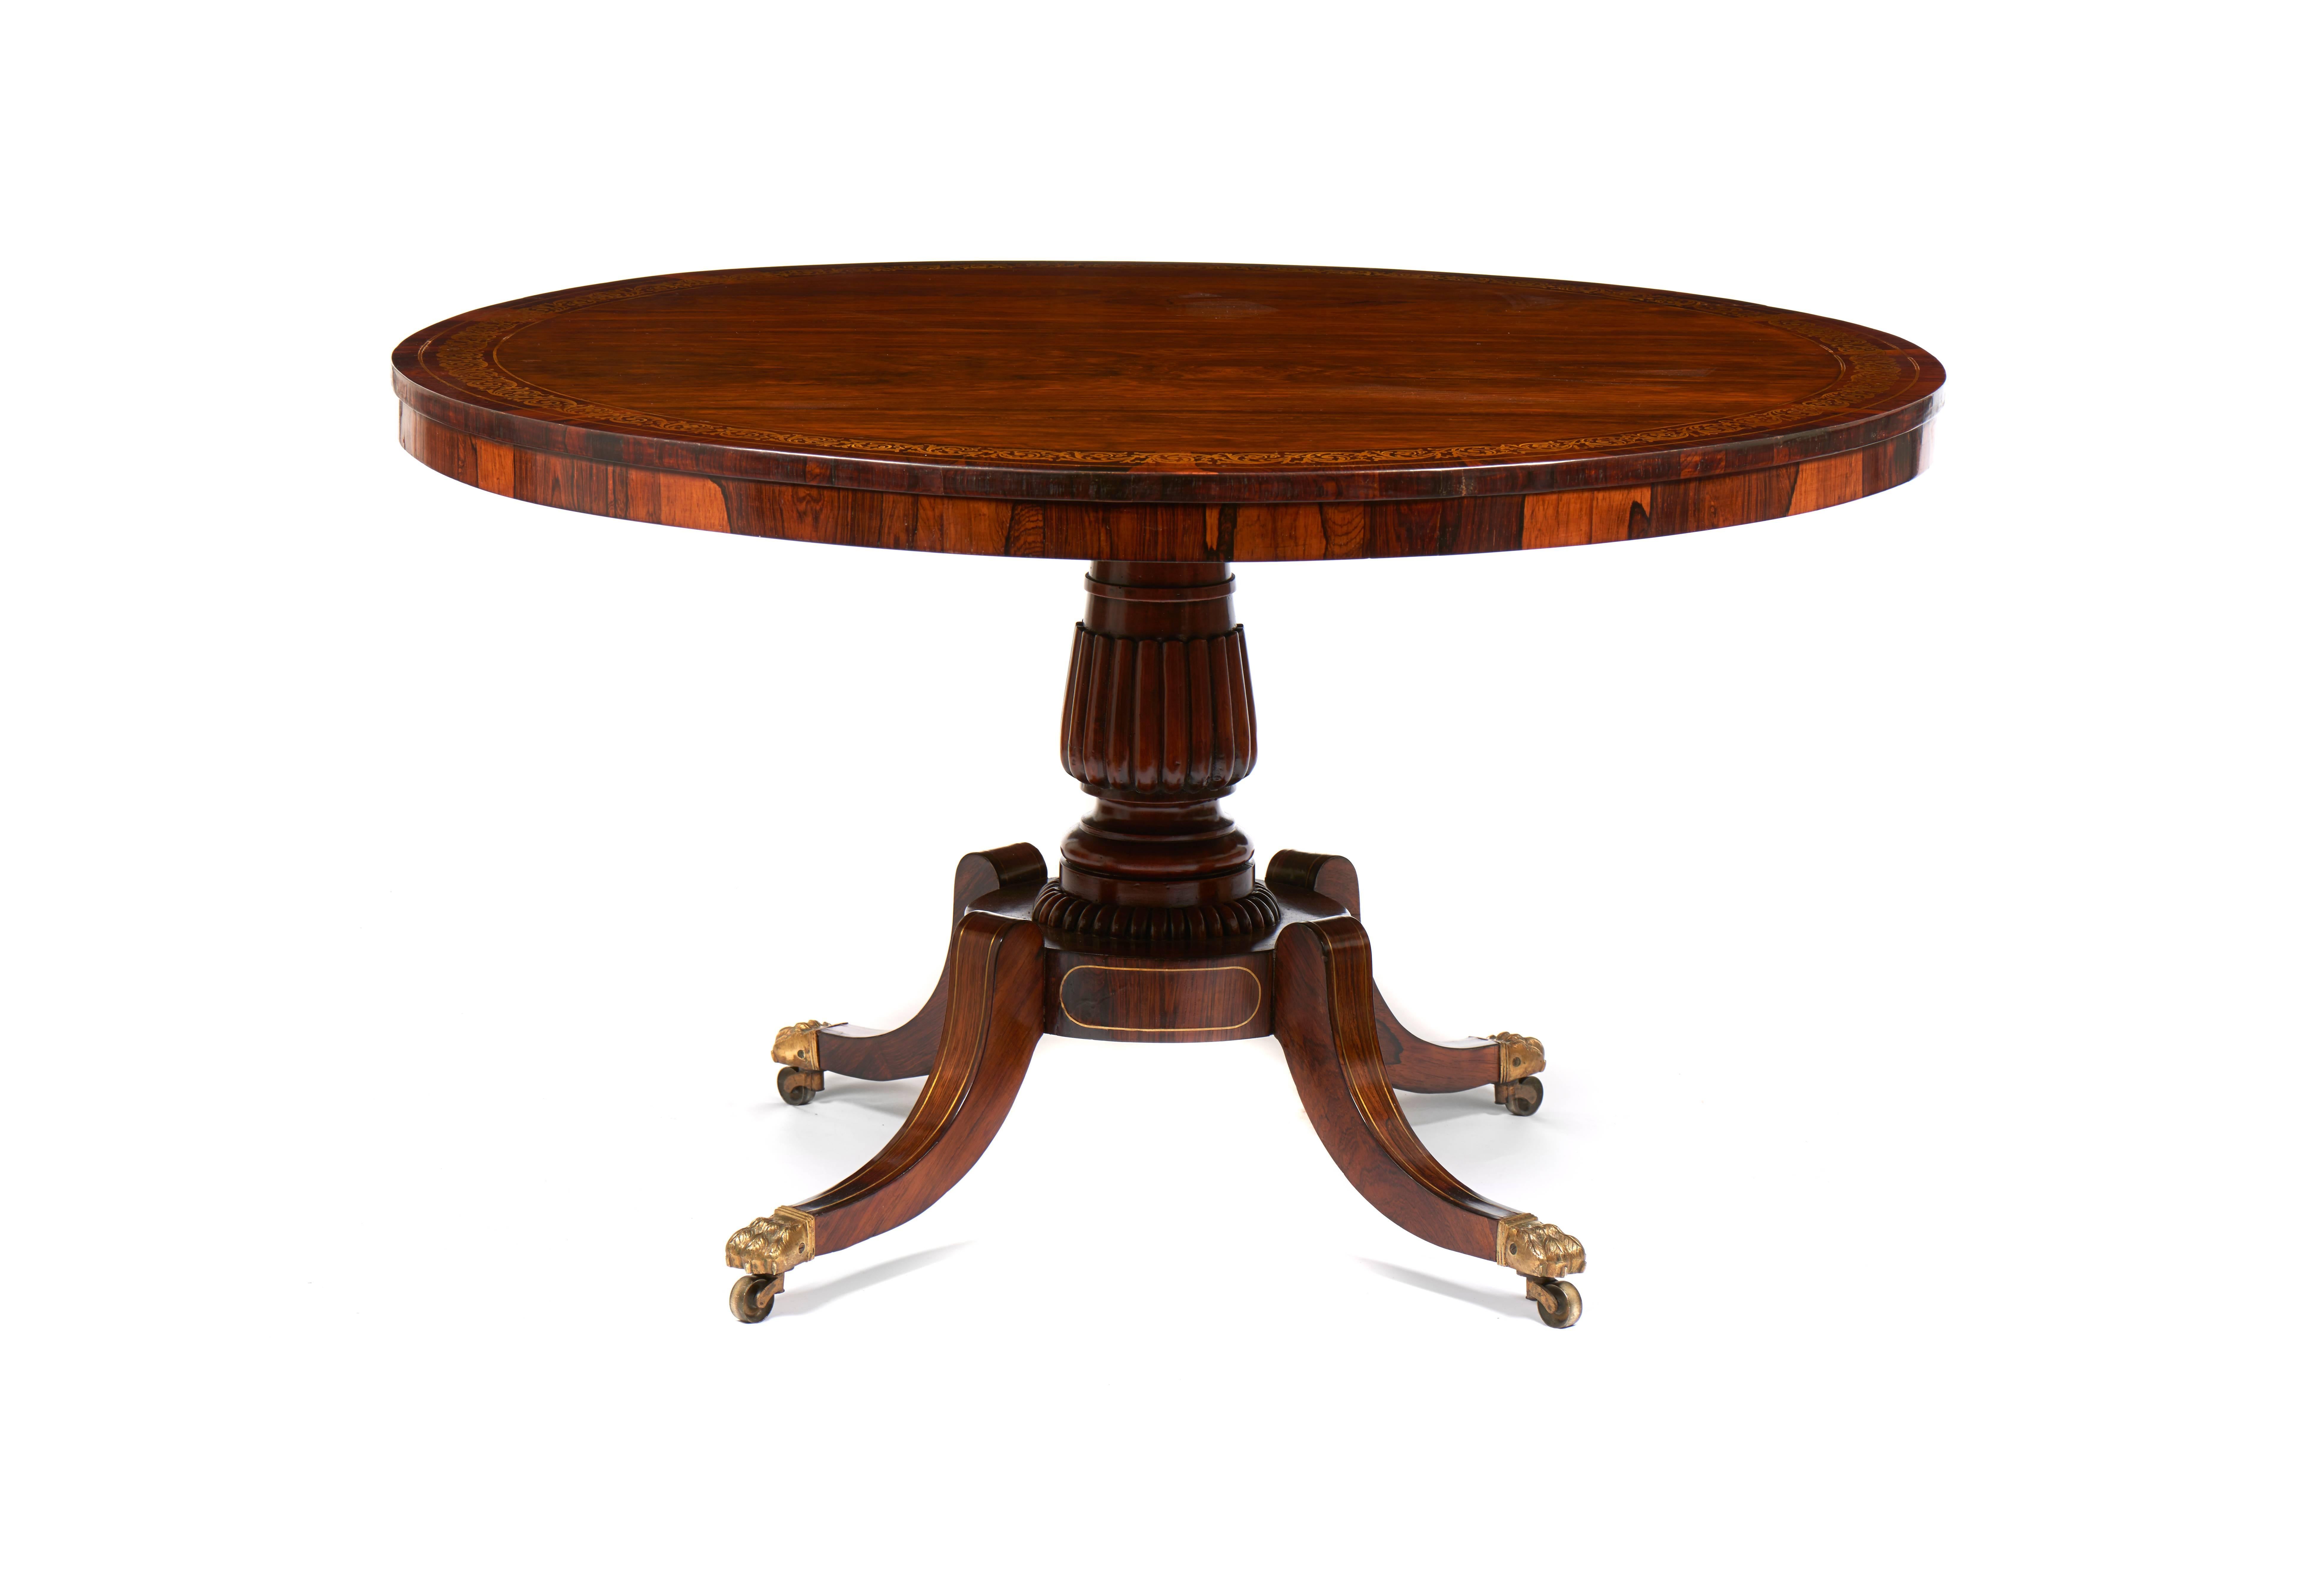 For sale on 1stdibs a Regency rosewood tilt-top breakfast table with a brass inland border on a turned reed column pedestal with four splay legs, terminating with the original brass caps and castors.